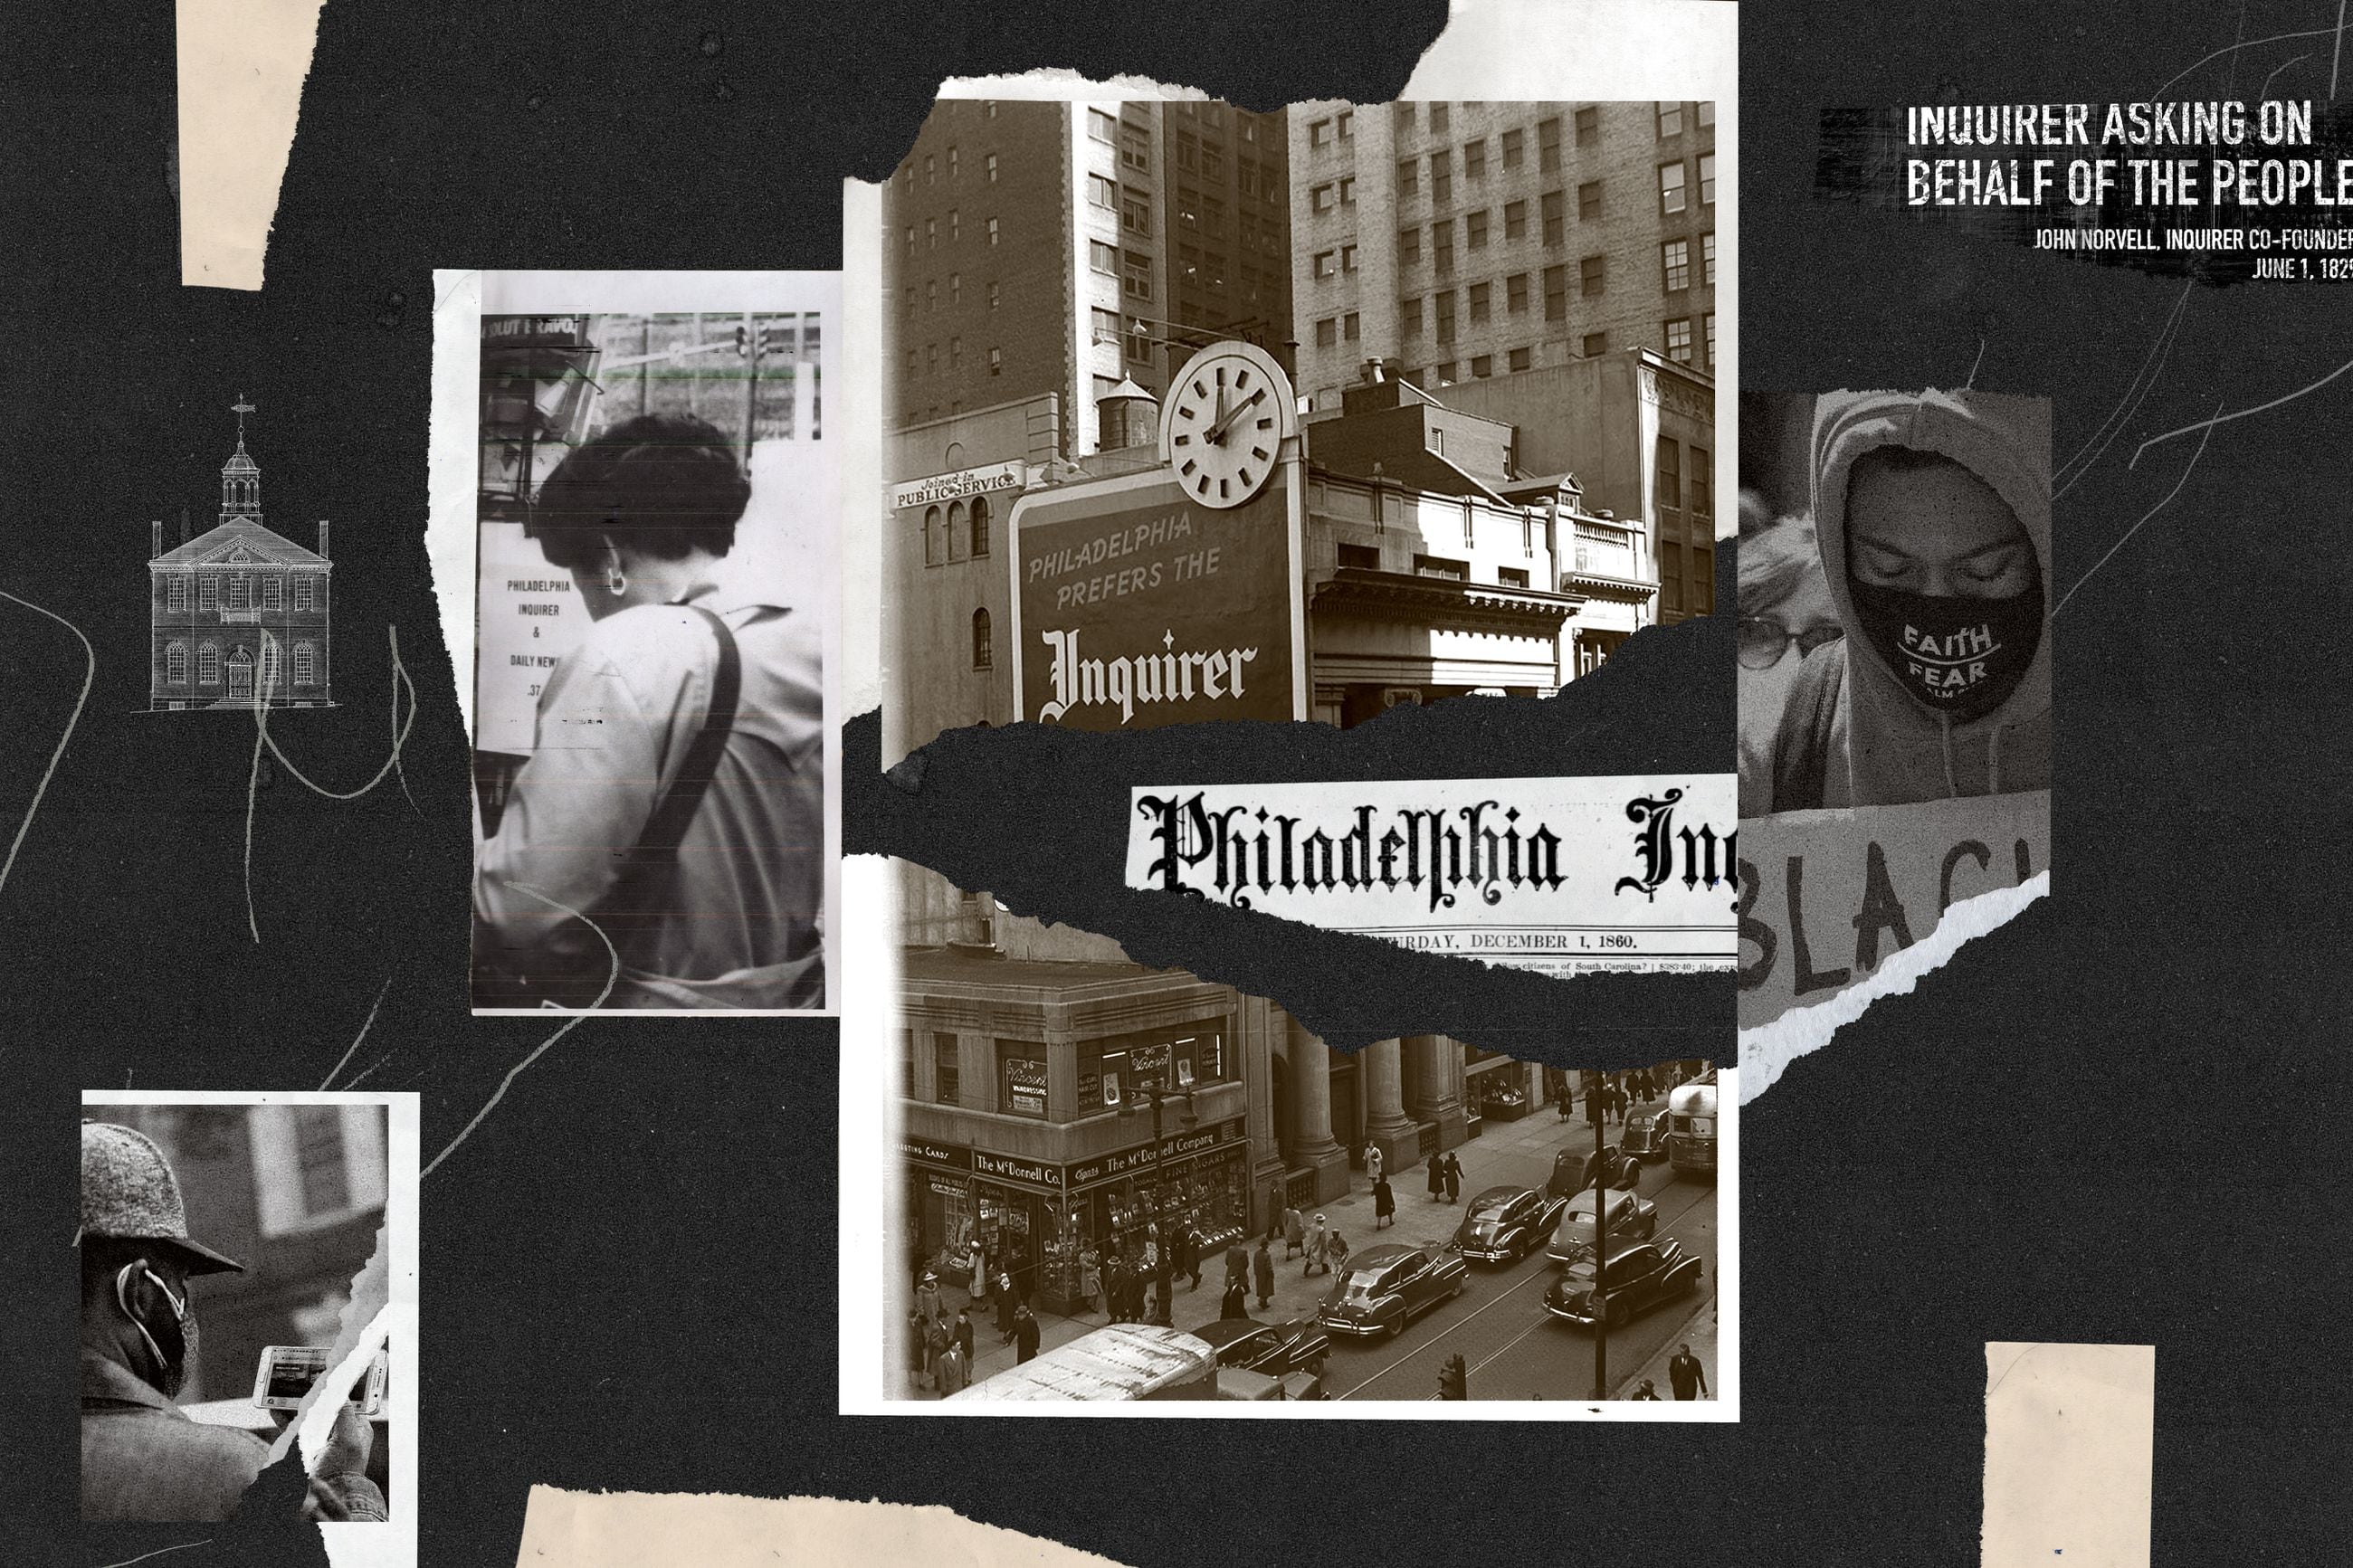 The Philadelphia Inquirer has grappled with racism for decades. Is